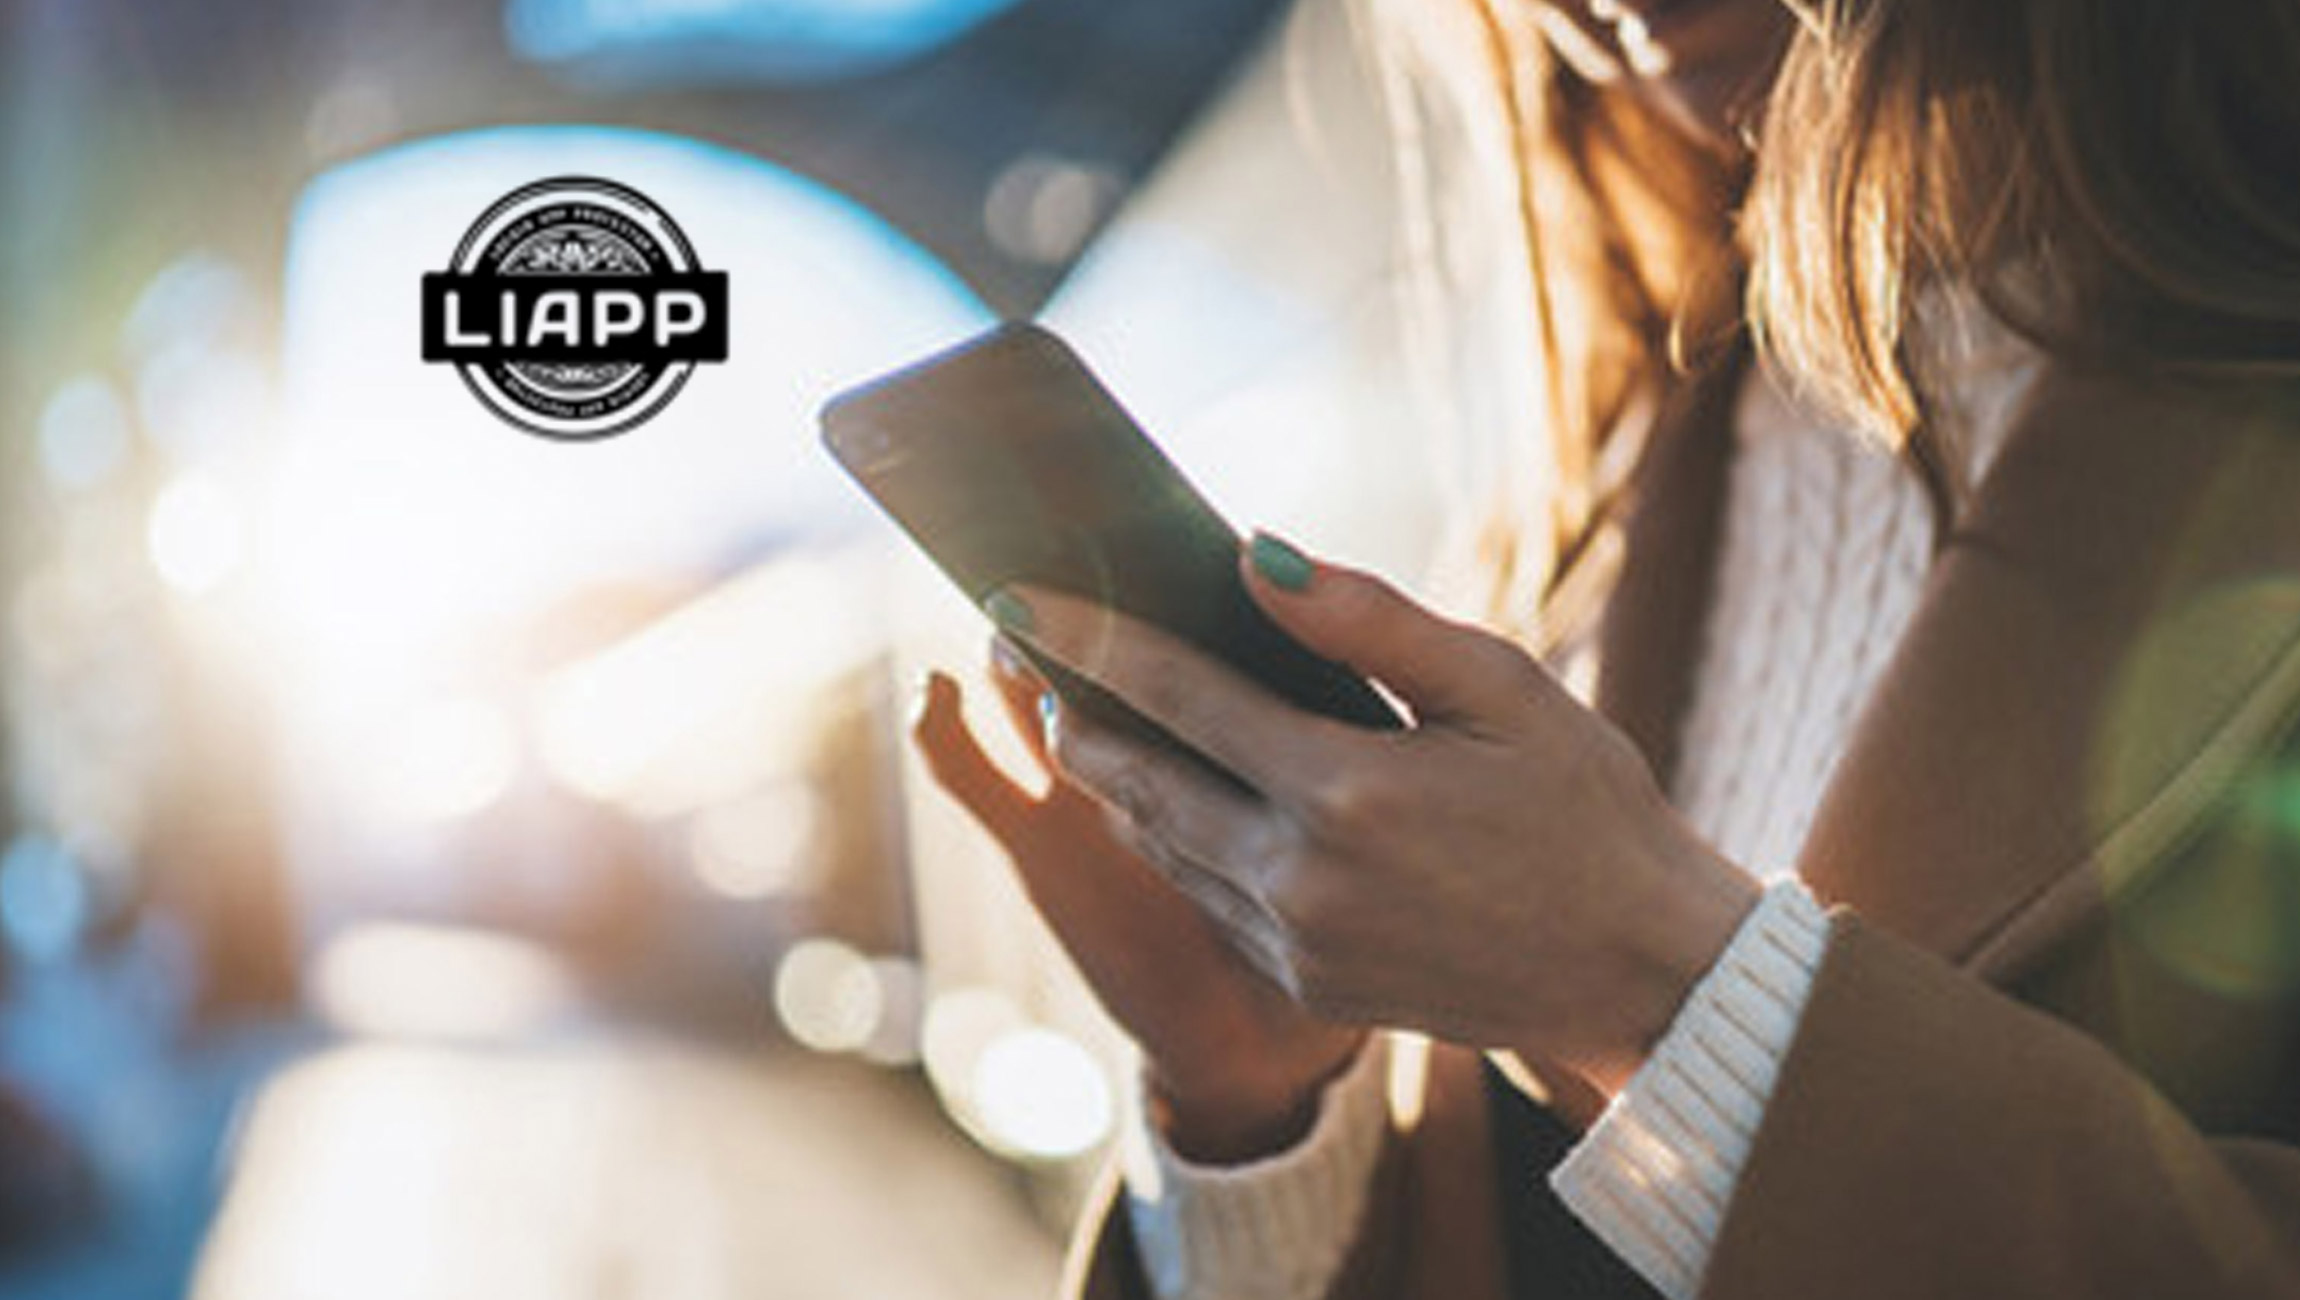 Mobile App Security Provider LIAPP To Expand Presence in Asia's Fastest Growing Economies, Accelerating Digitalization and Financial Inclusion